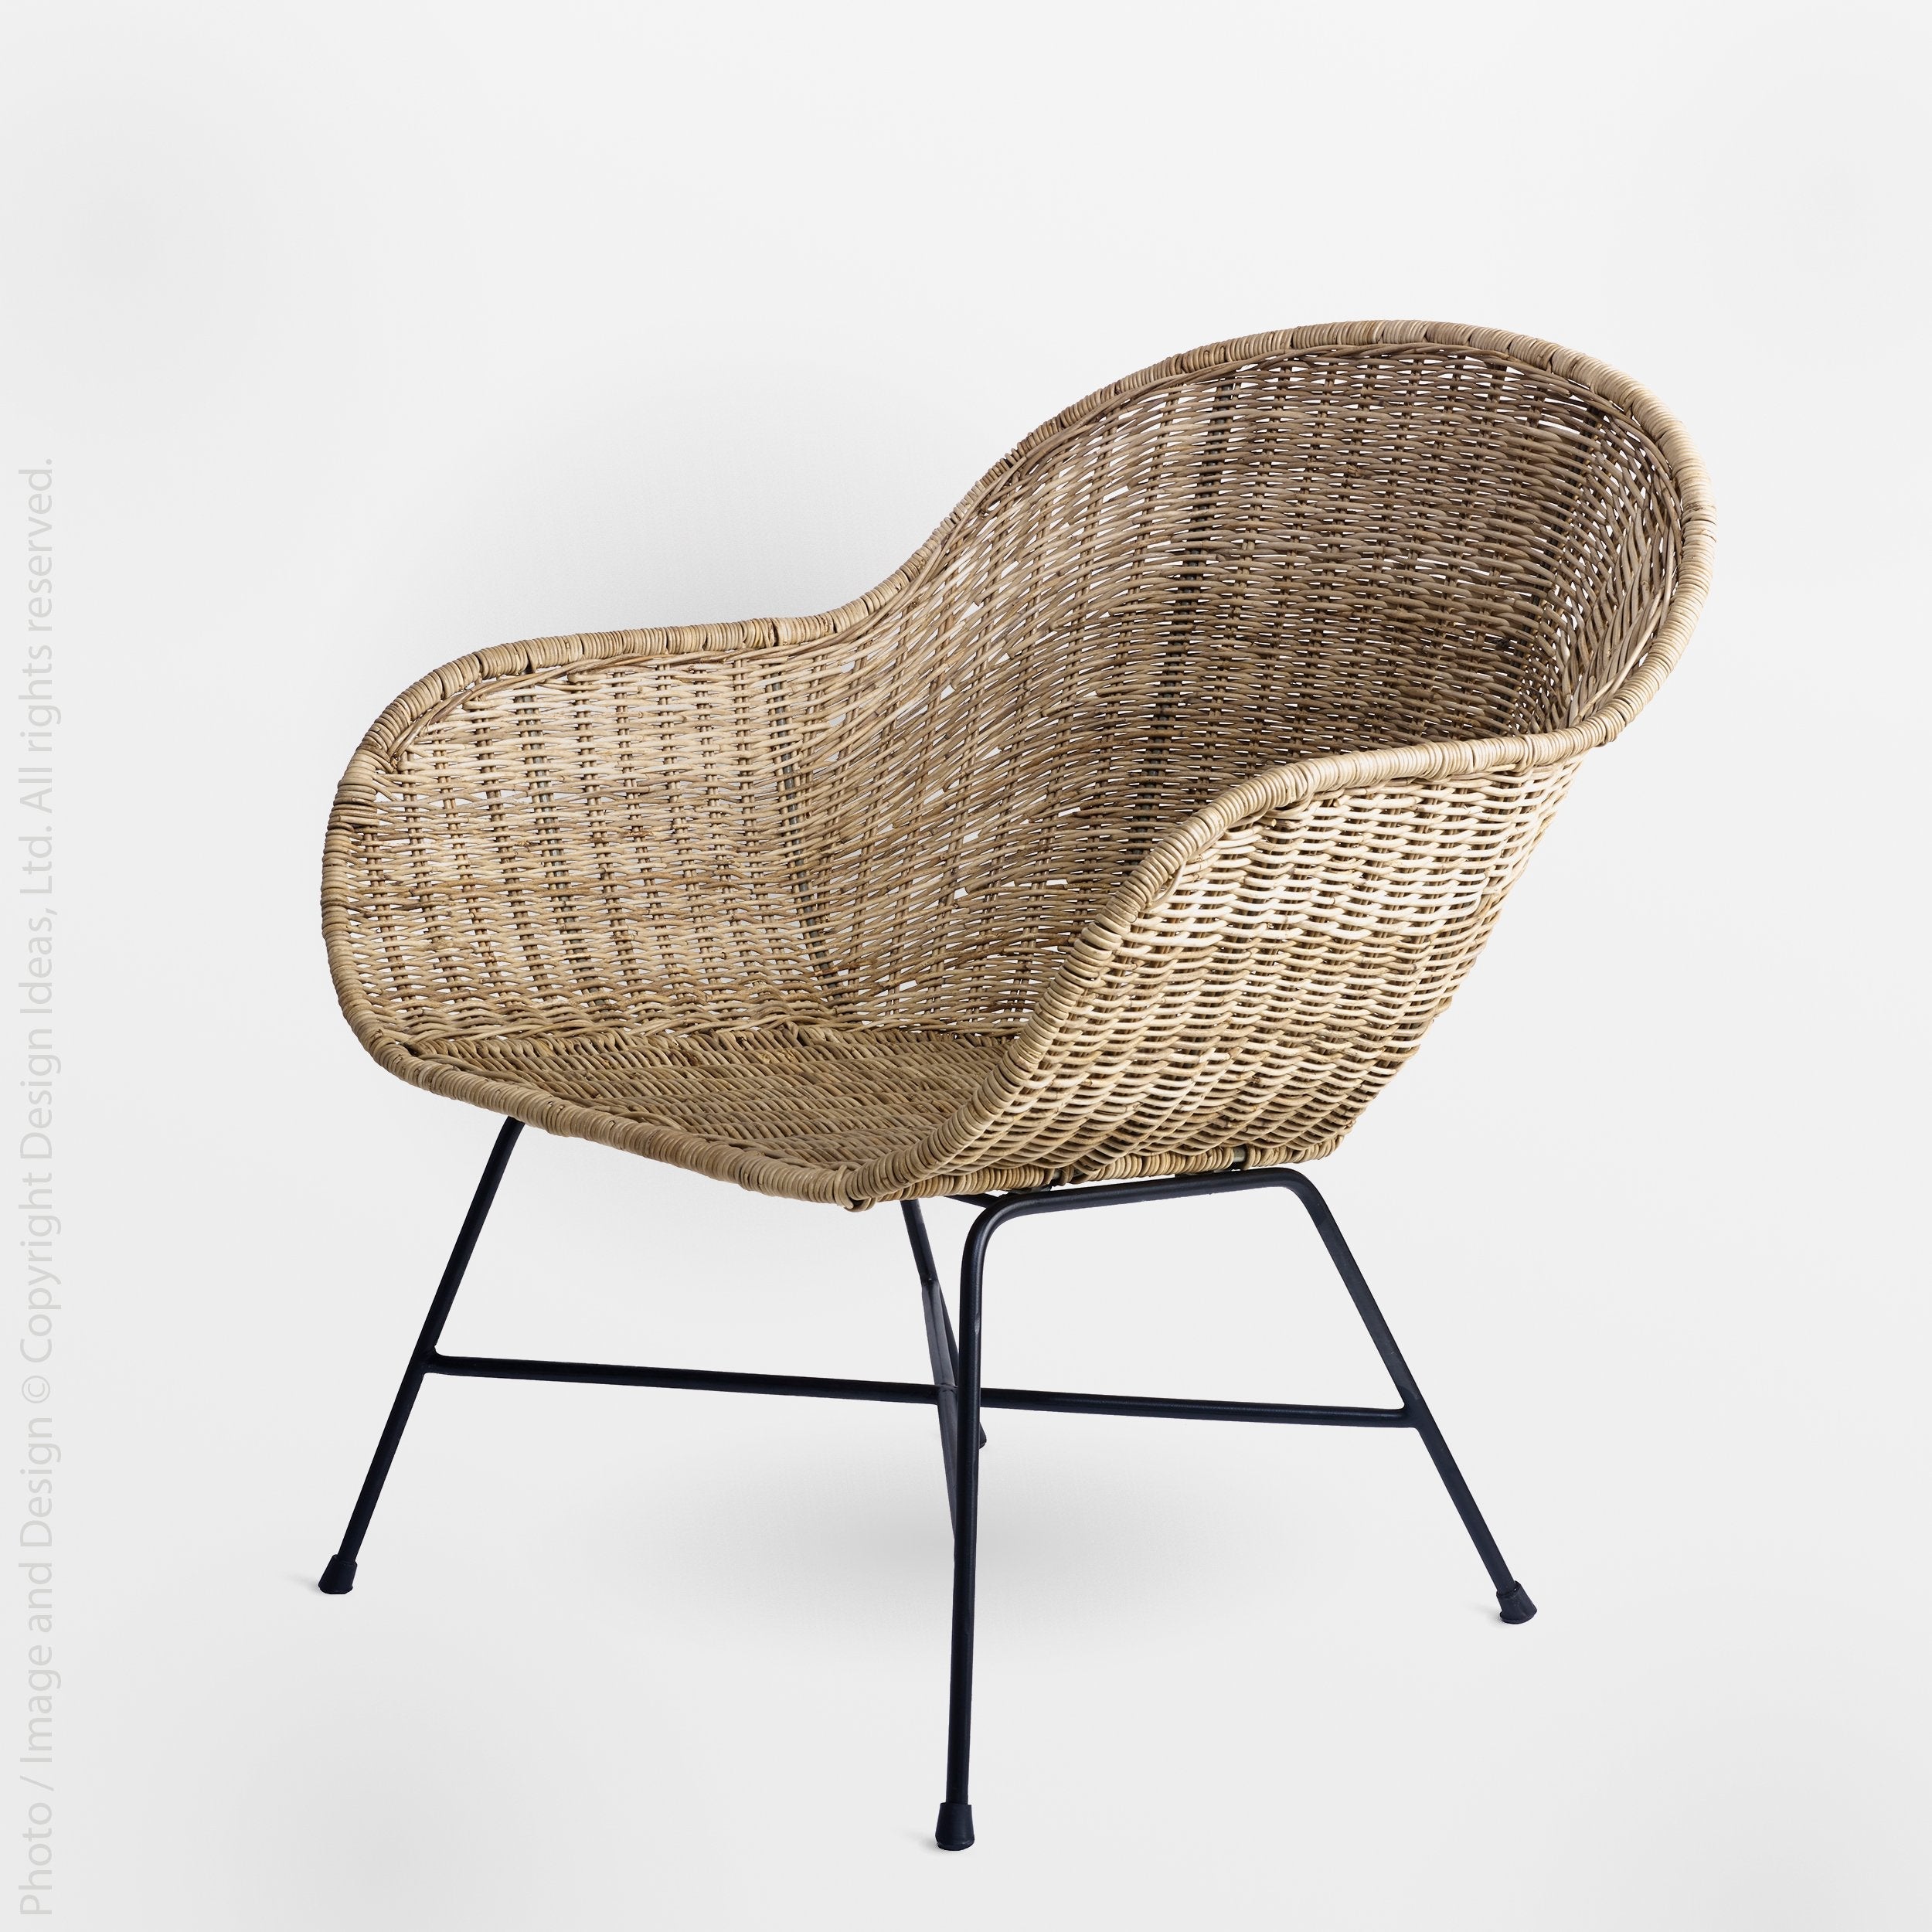 Ormond Rattan Lounge Chair - Black Color | Image 1 | From the Ormond Collection | Exquisitely made with natural rattan for long lasting use | Available in natural color | texxture home